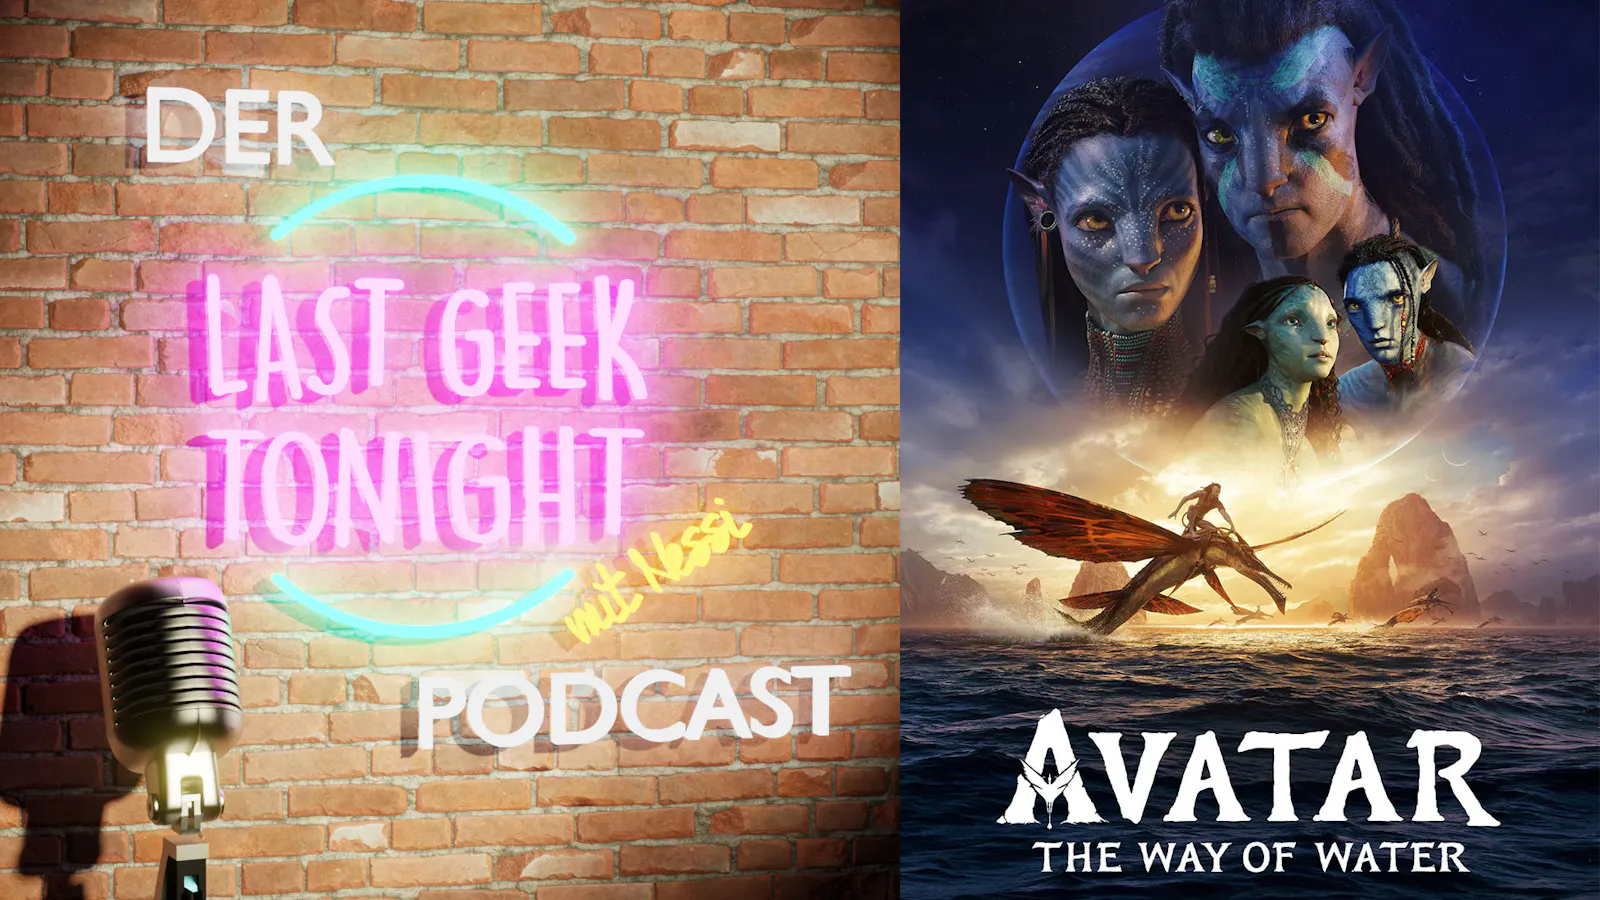 LGT PODCAST #001 – Avatar: The Way of Water